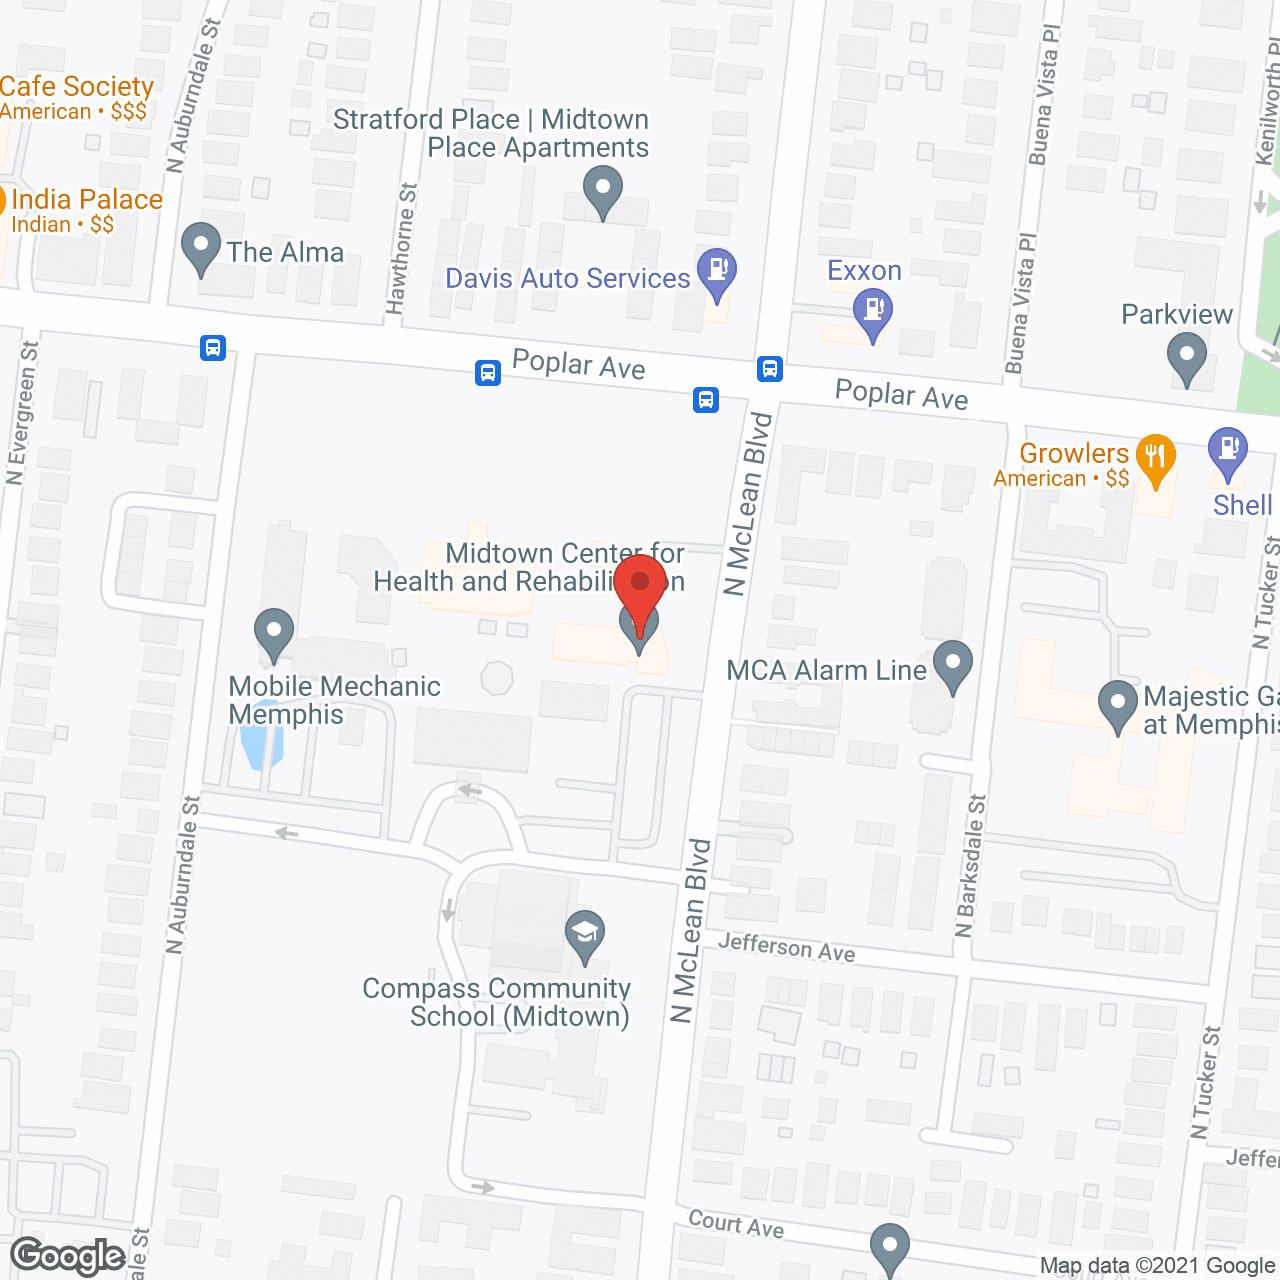 Midtown Center for Health and Rehabilitation in google map